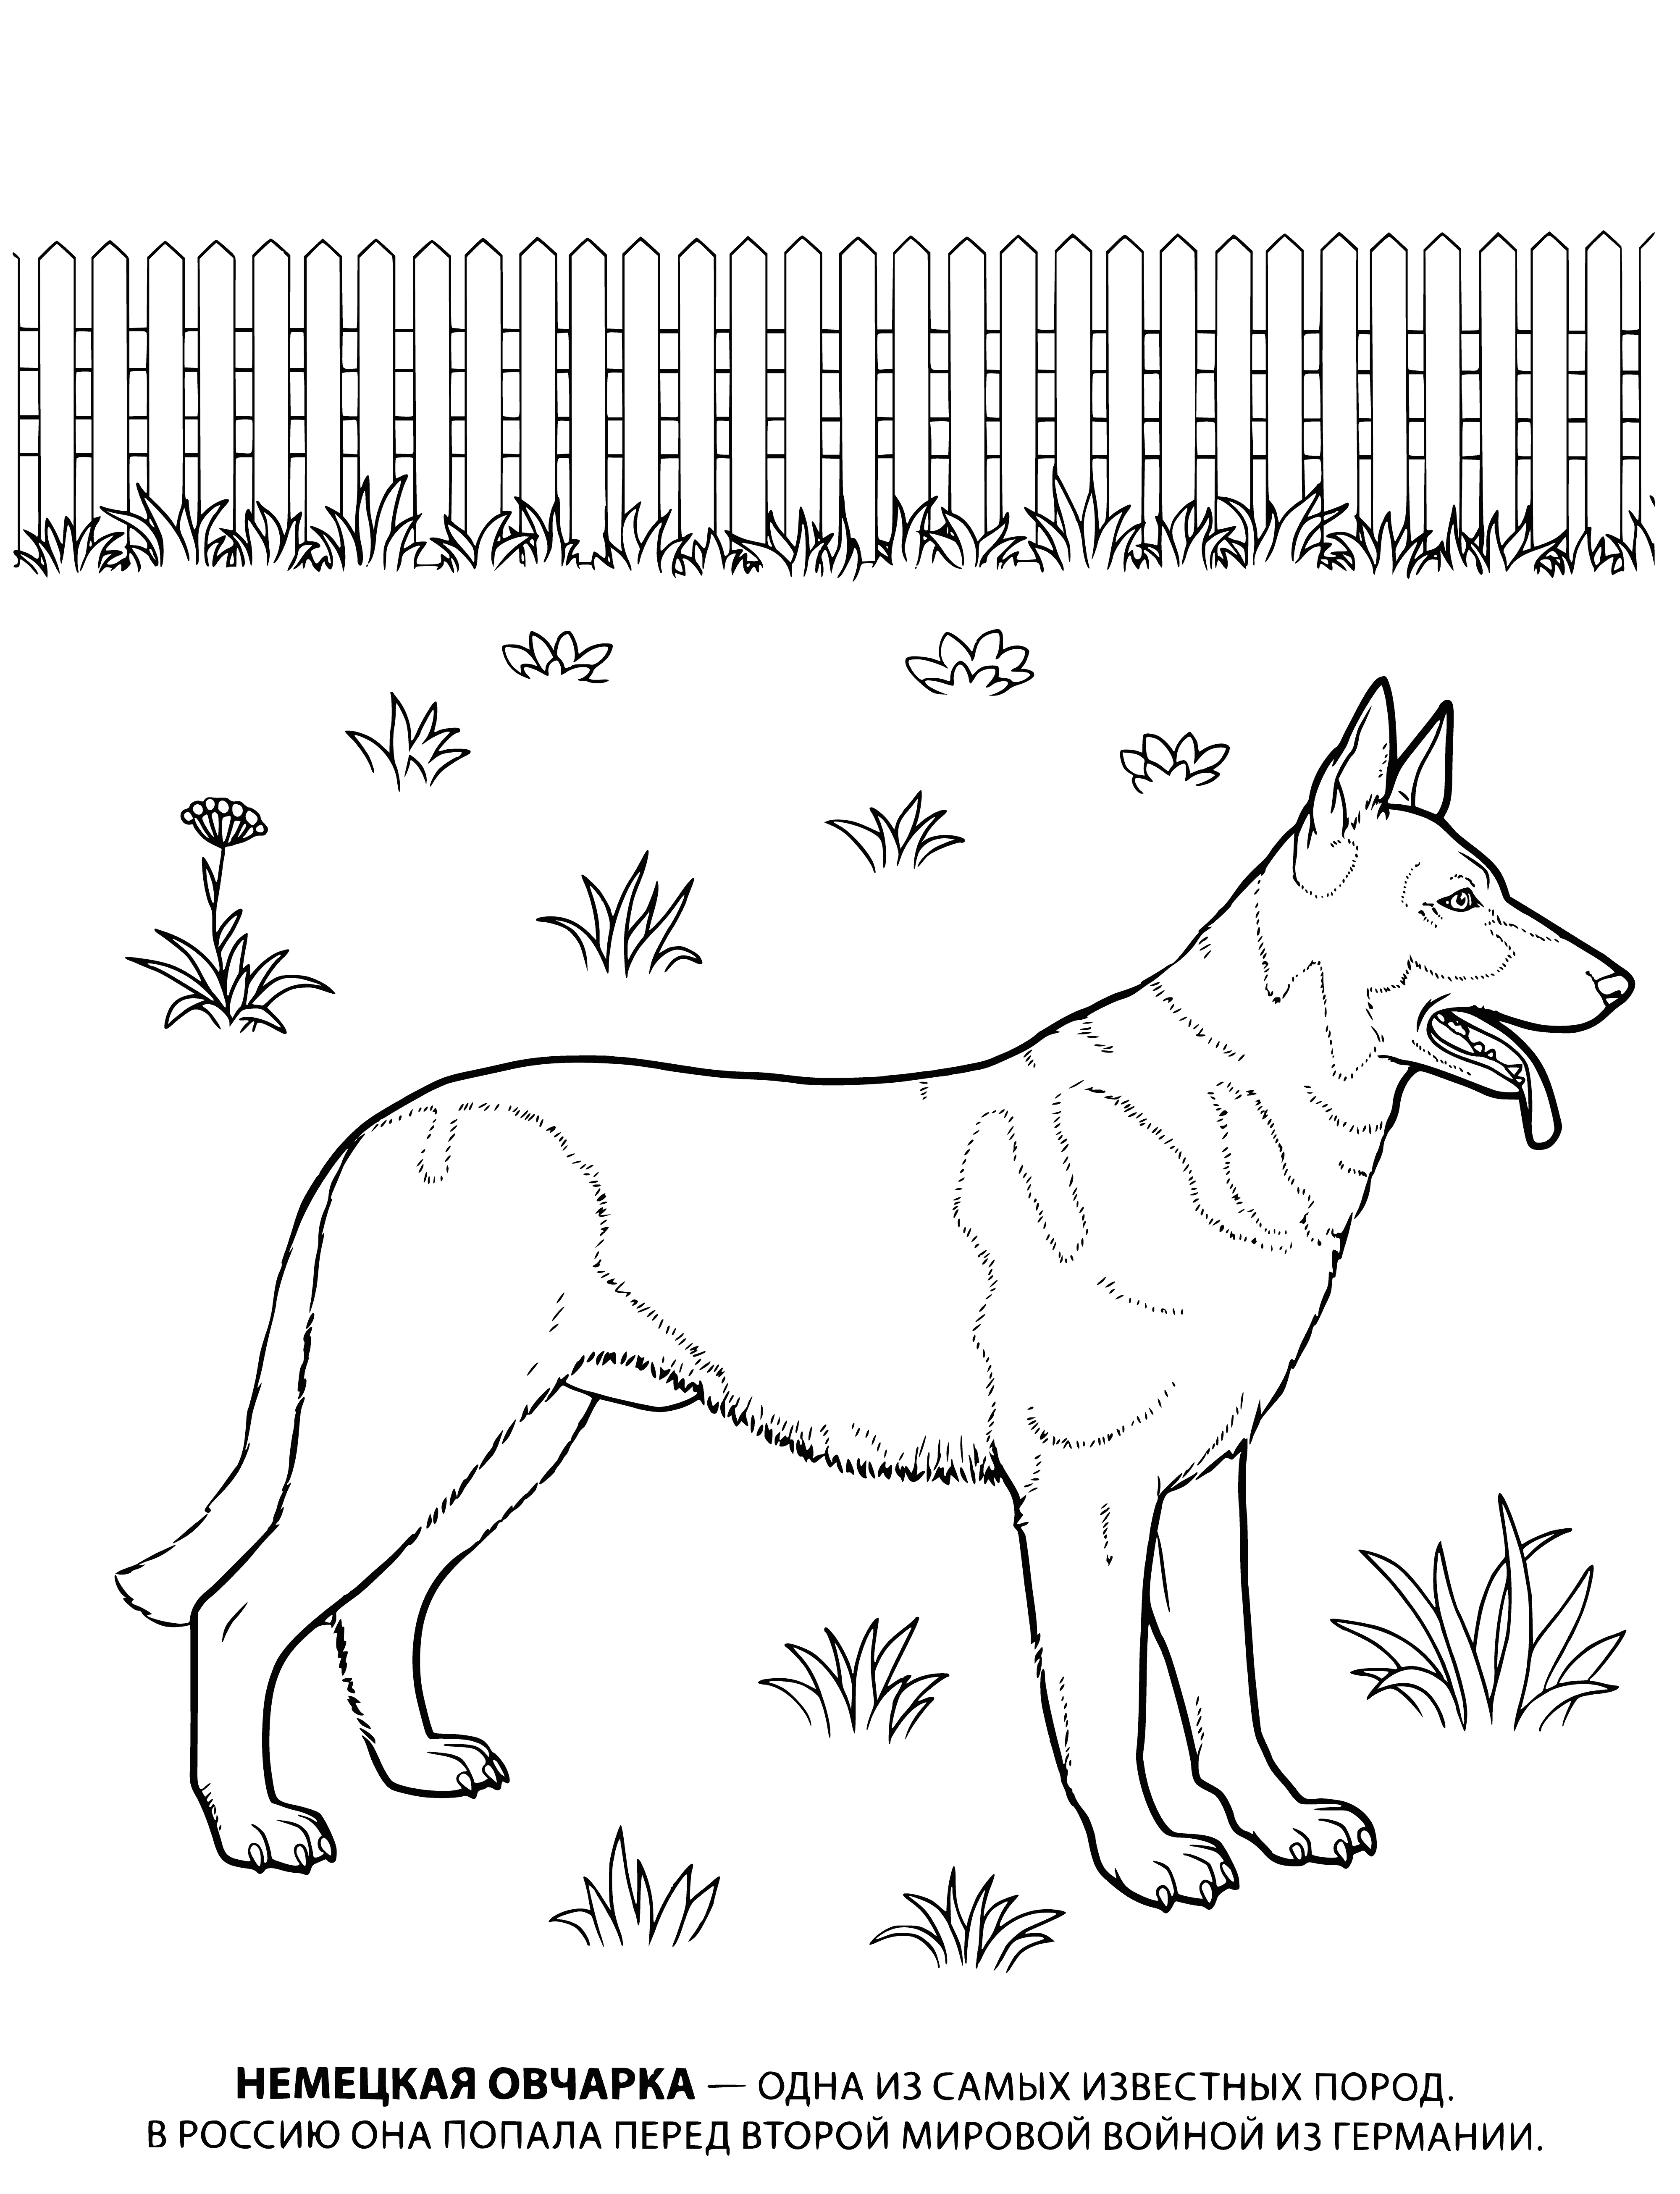 coloring page: A large muscular dog with brown and black fur, erect ears and long curved tail, looking serious while sitting on haunches.